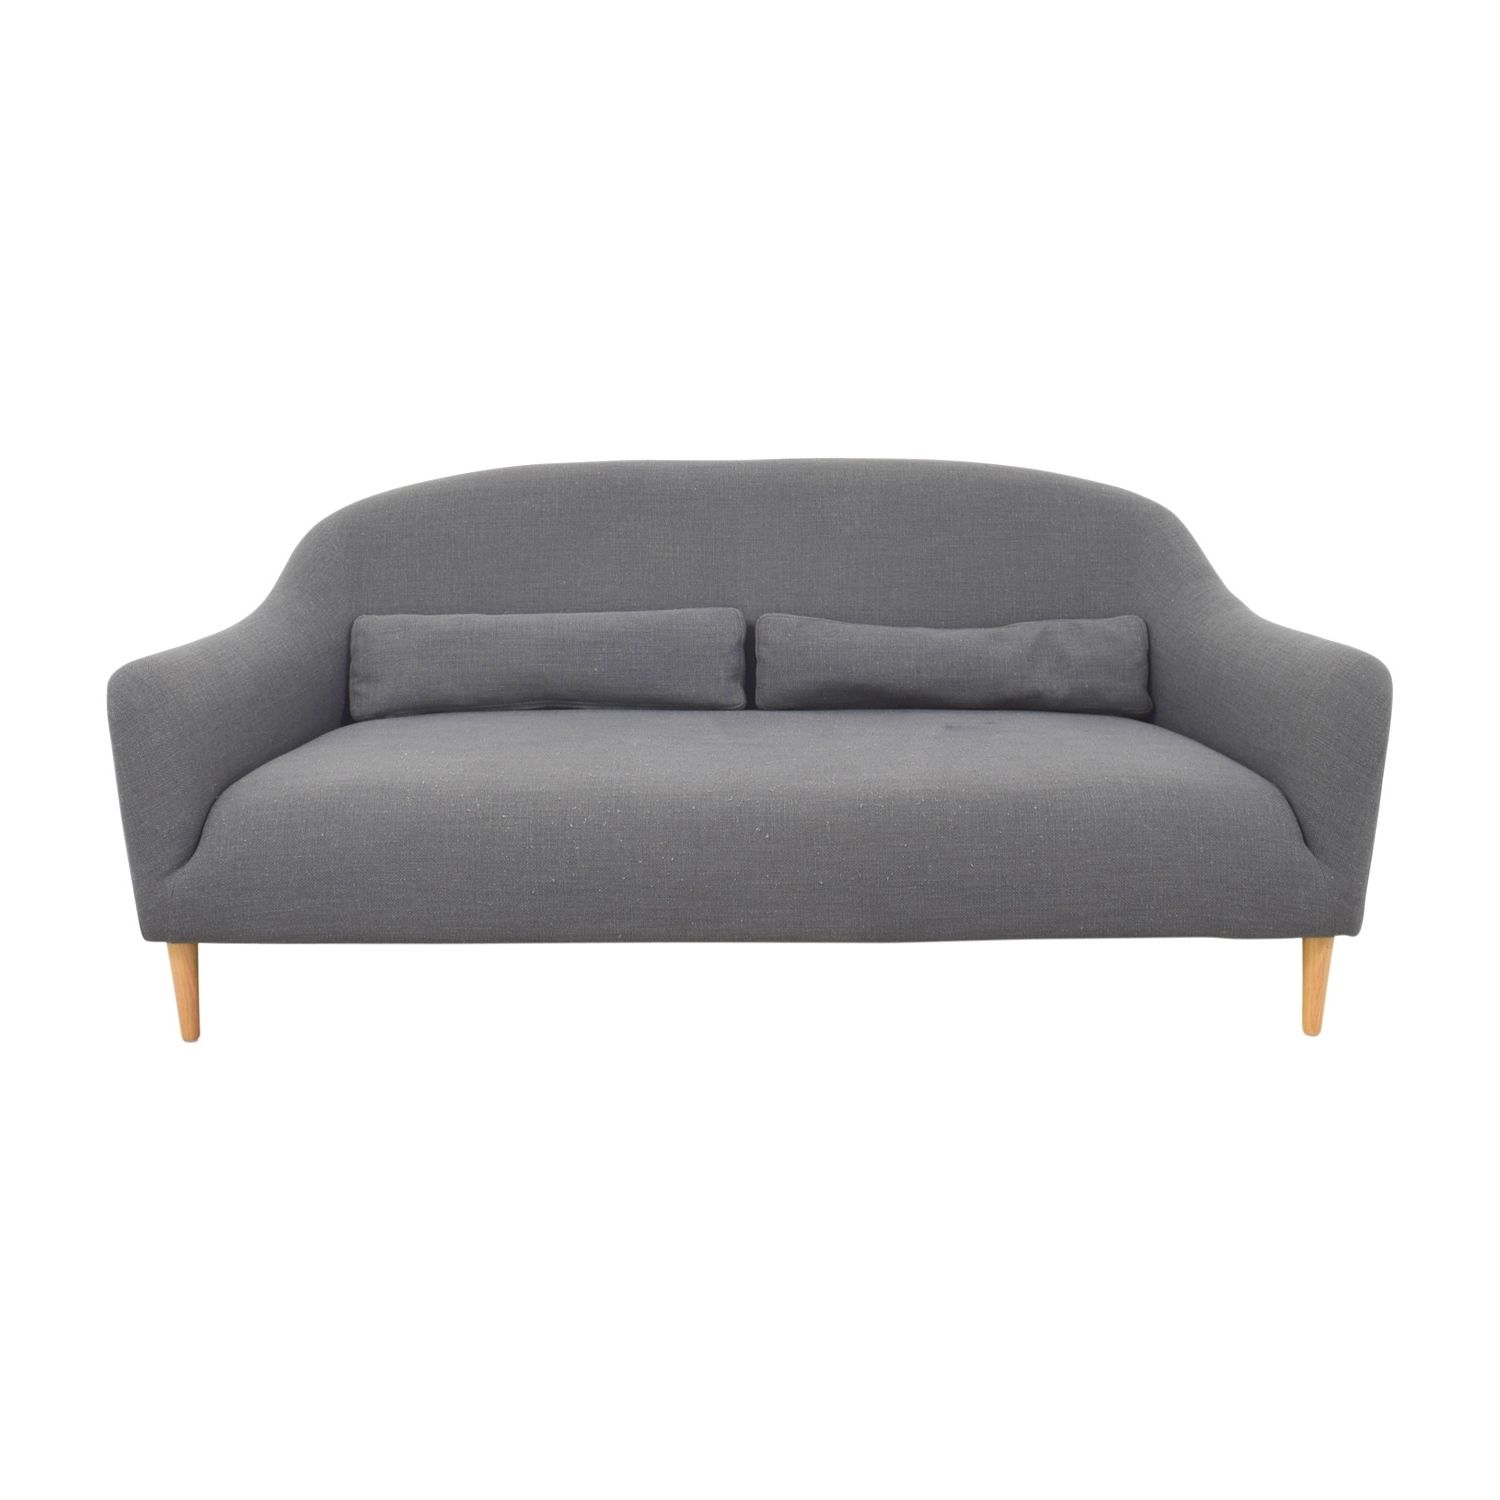 [%63% Off – Crate & Barrel Crate & Barrel Pennie Single Cushion Sofa Throughout 2018 One Cushion Sofas|One Cushion Sofas Inside Favorite 63% Off – Crate & Barrel Crate & Barrel Pennie Single Cushion Sofa|Popular One Cushion Sofas Inside 63% Off – Crate & Barrel Crate & Barrel Pennie Single Cushion Sofa|Favorite 63% Off – Crate & Barrel Crate & Barrel Pennie Single Cushion Sofa In One Cushion Sofas%] (View 13 of 15)